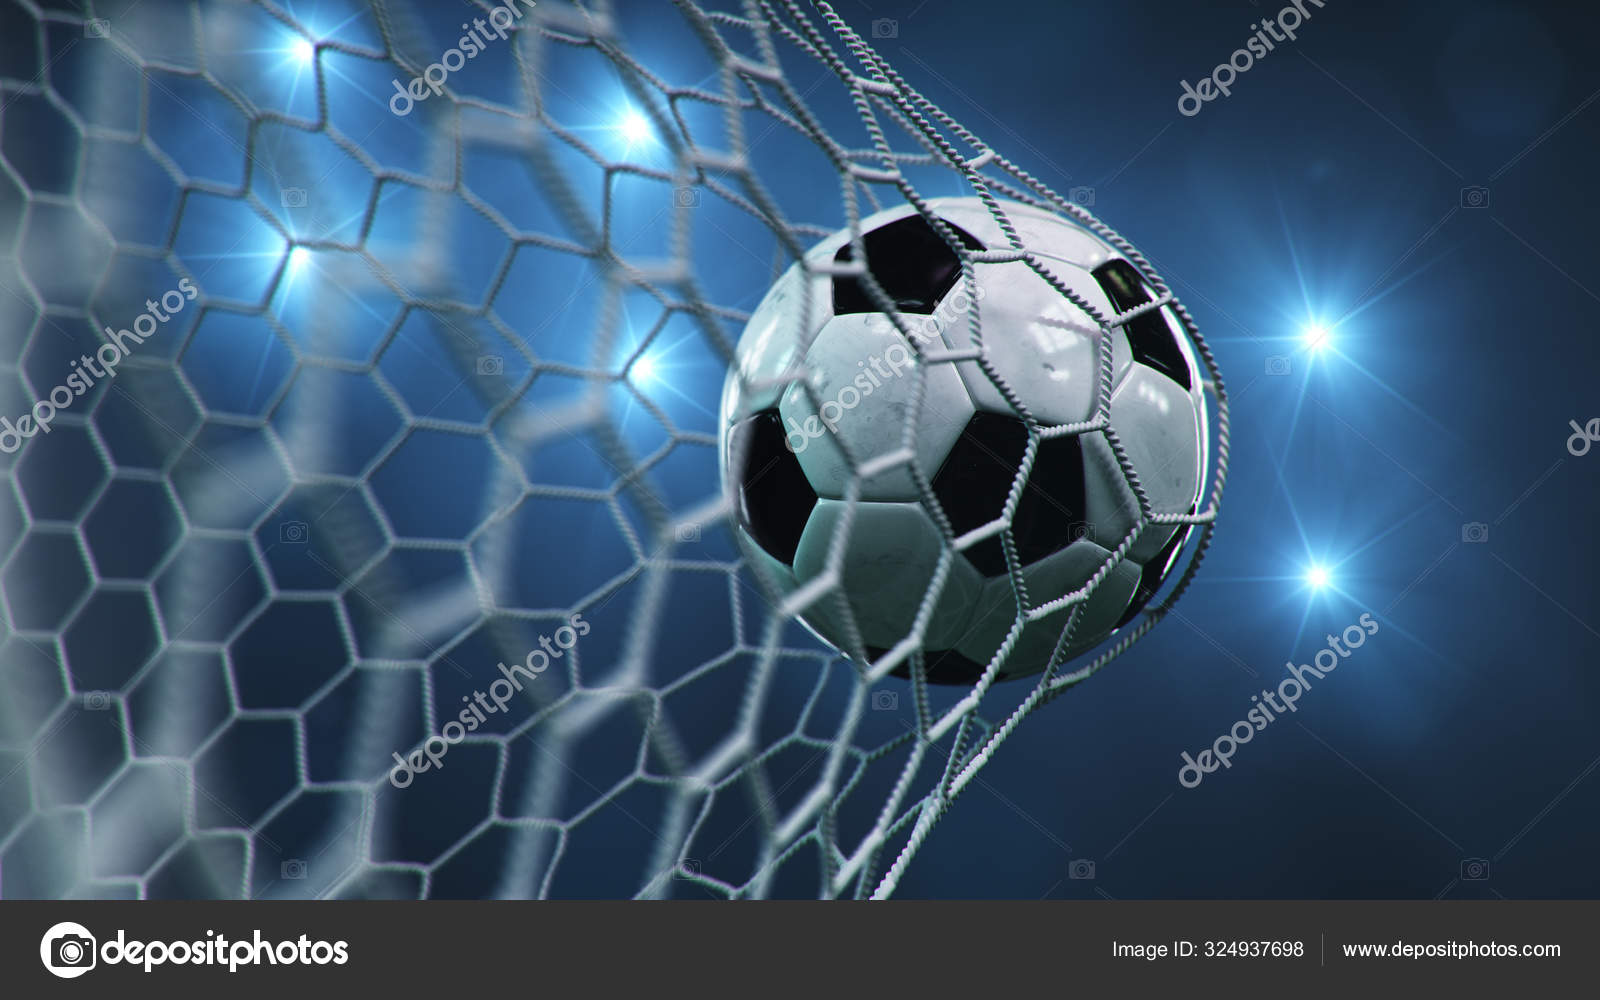 Soccer Ball Flew Into The Goal Soccer Ball Bends The Net Against The Background Of Flashes Of Light Soccer Ball In Goal Net On Blue Background A Moment Of Delight 3d Illustration